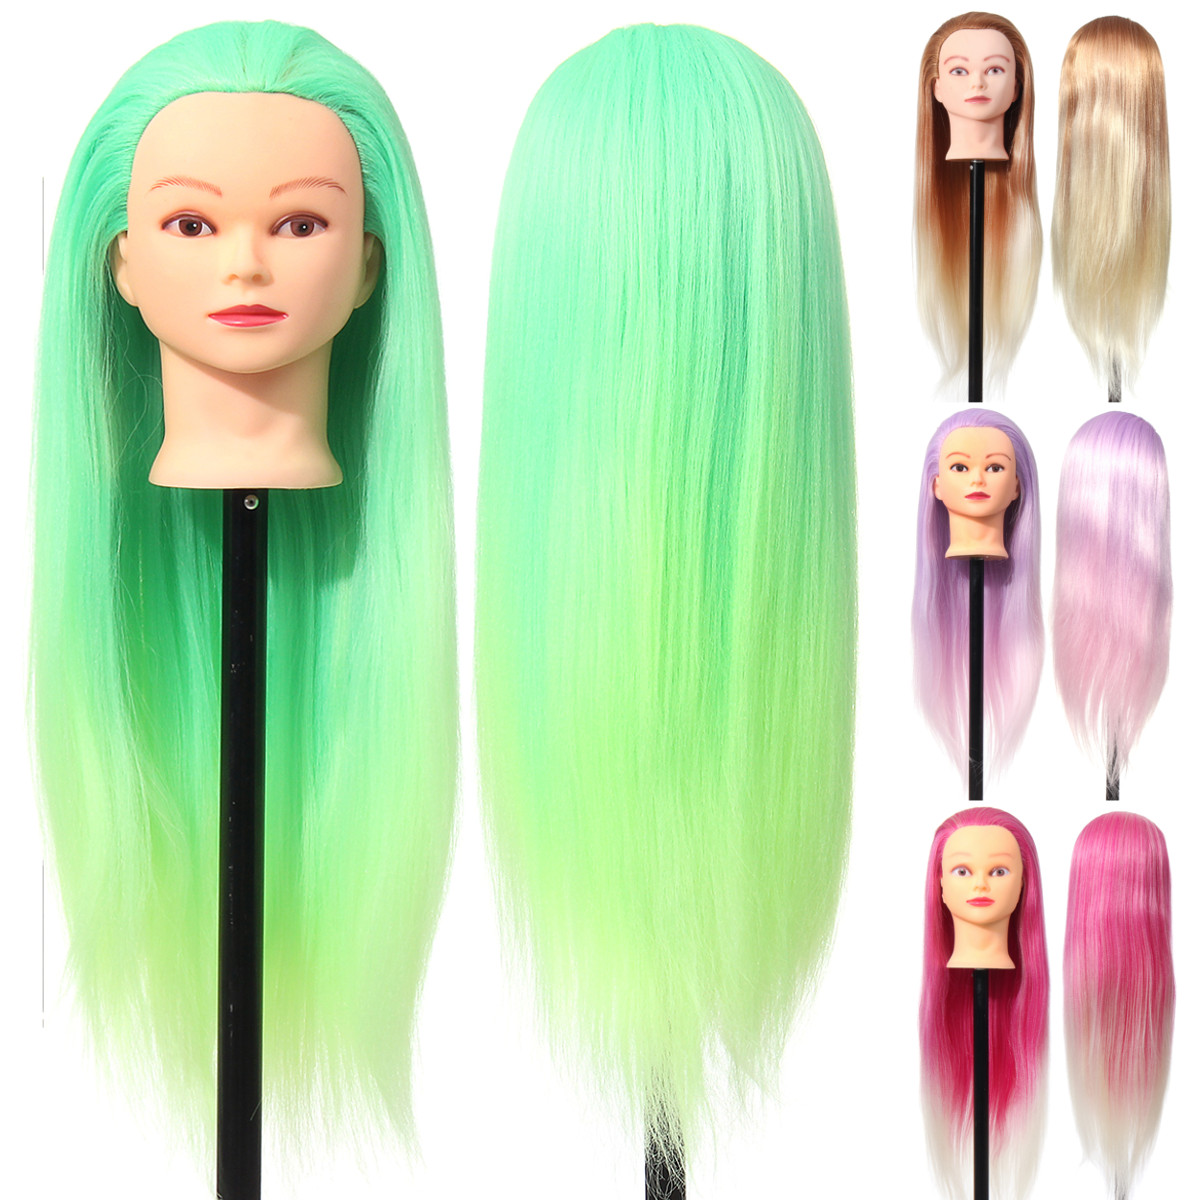 

27'' Colorful Mannequin Head Hair Hairdressing Practice Training Salon + Clamp